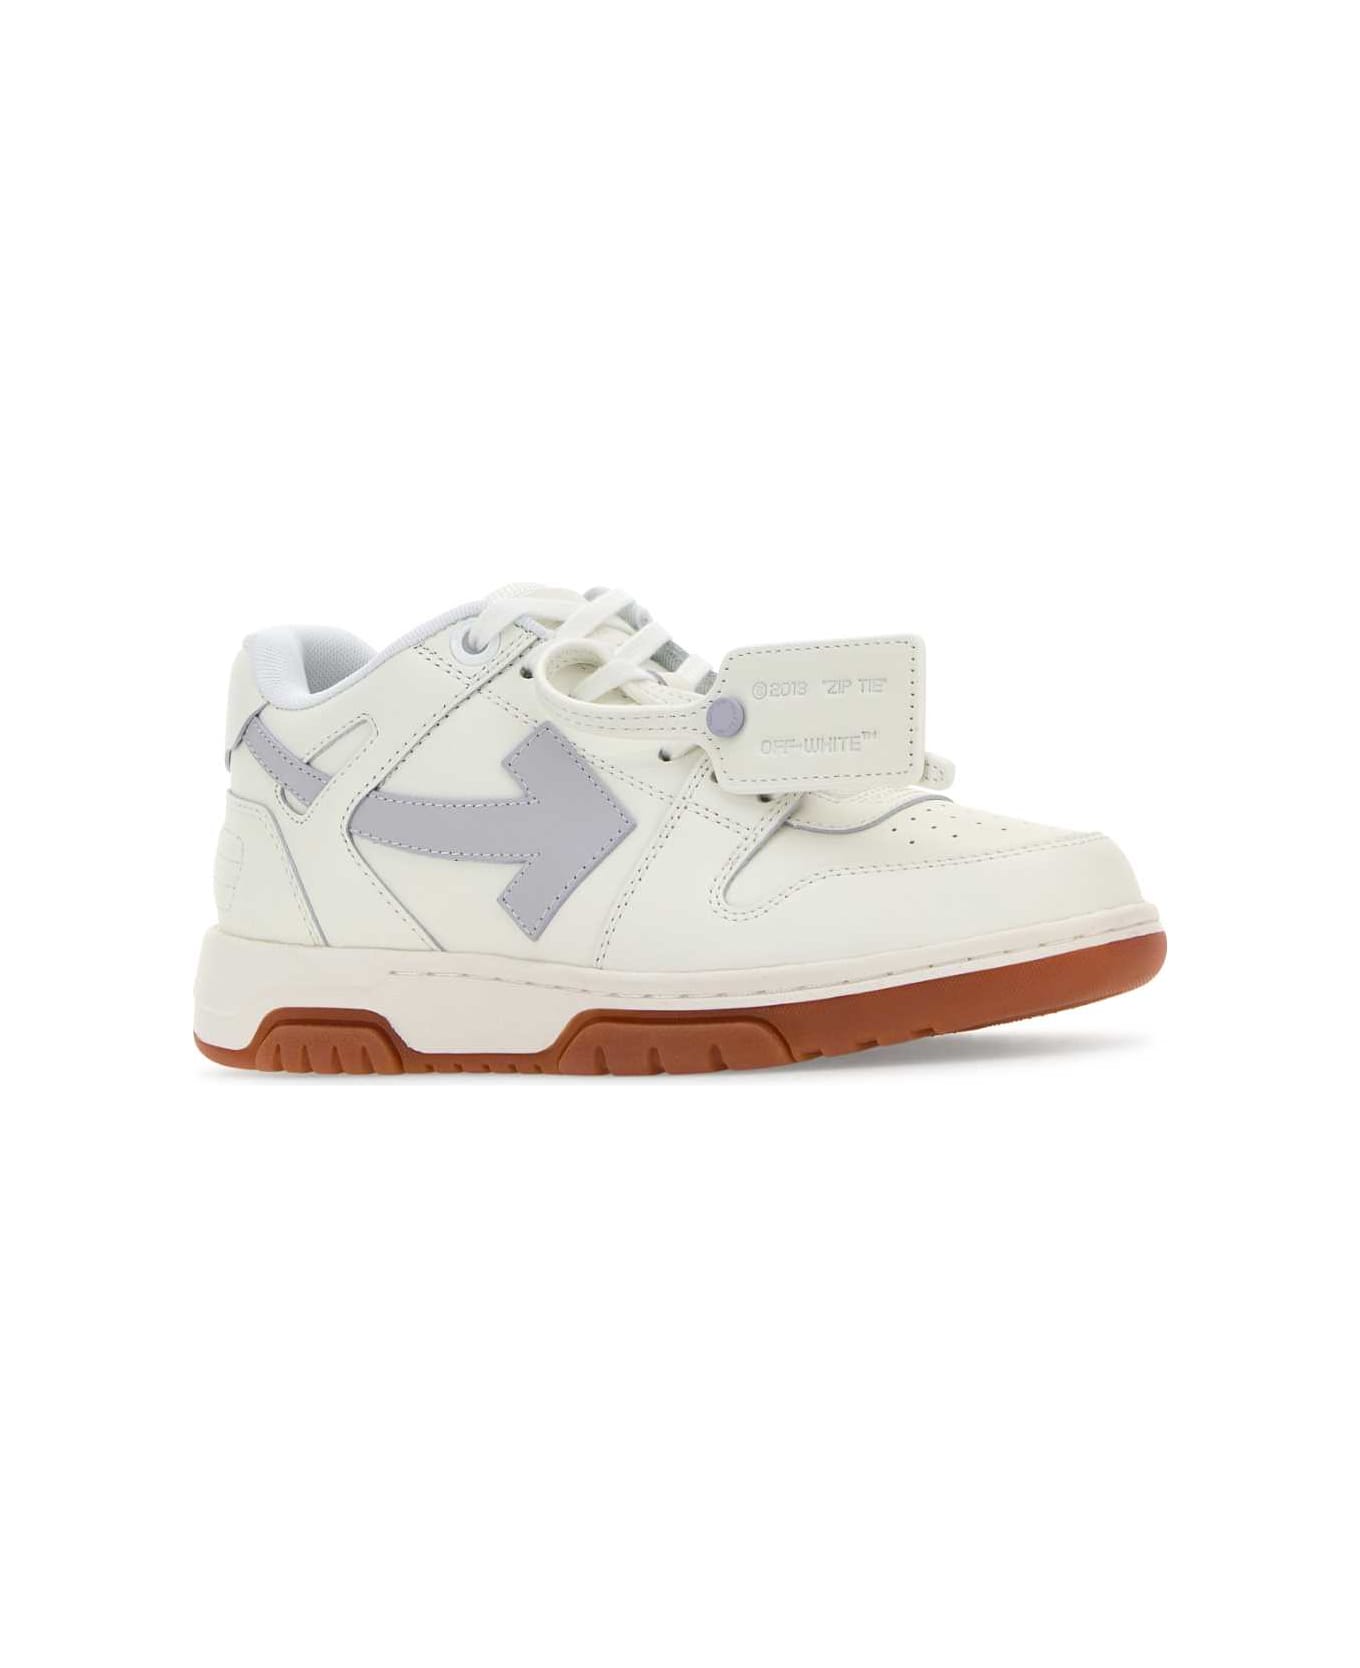 Off-White Two-tone Leather Out Of Office Sneakers - WHITELIGH スニーカー